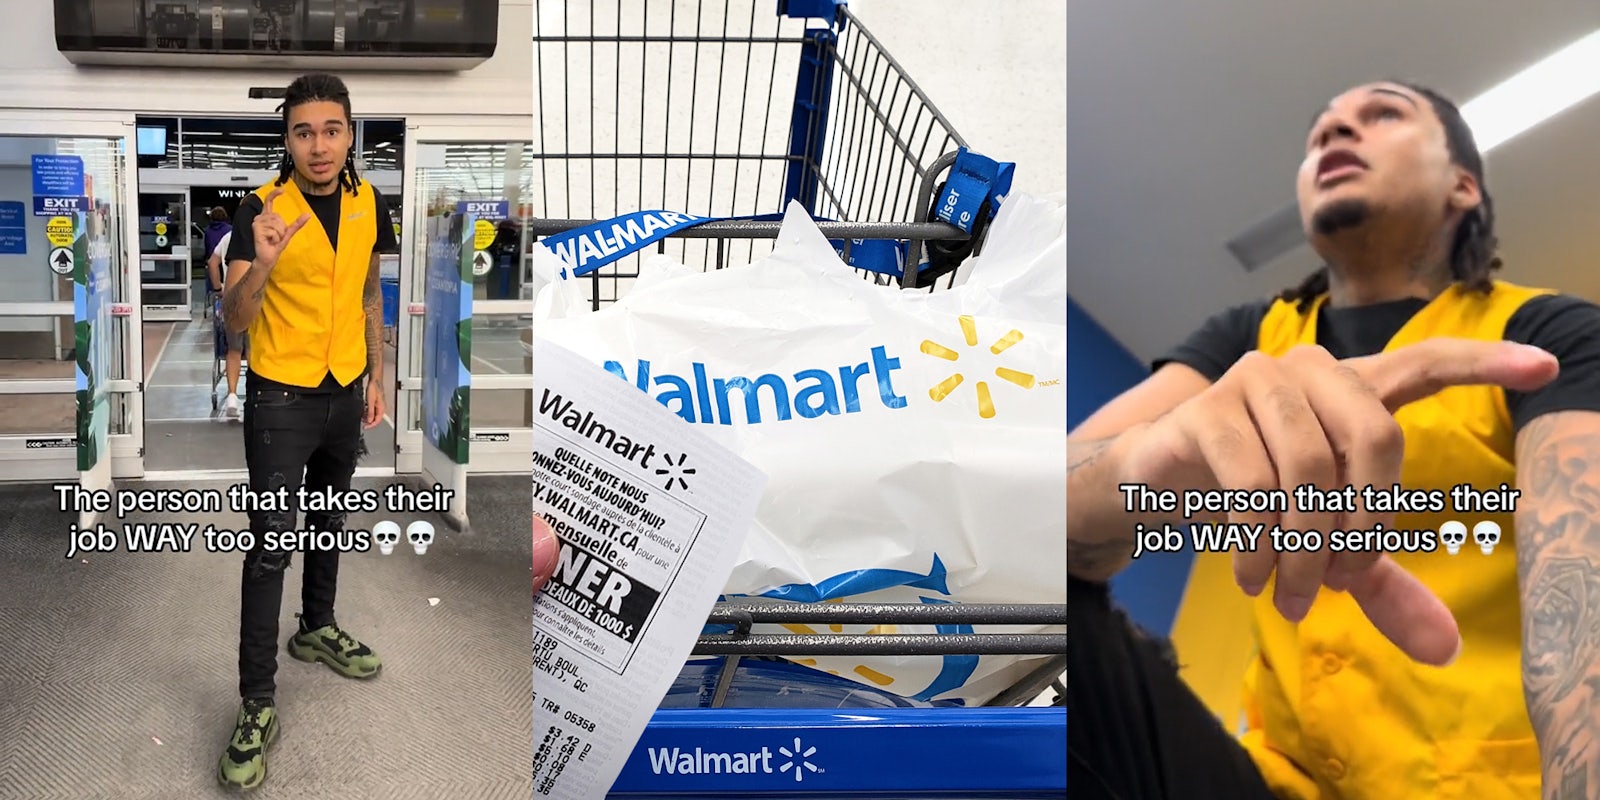 Walmart employee asking for receipt with caption 'The person that takes their job WAY too serious' (l) Walmart shopper holding receipt with Walmart bag in cart (c) Walmart employee asking for receipt on top of shopper with caption 'The person that takes their job WAY too serious' (r)